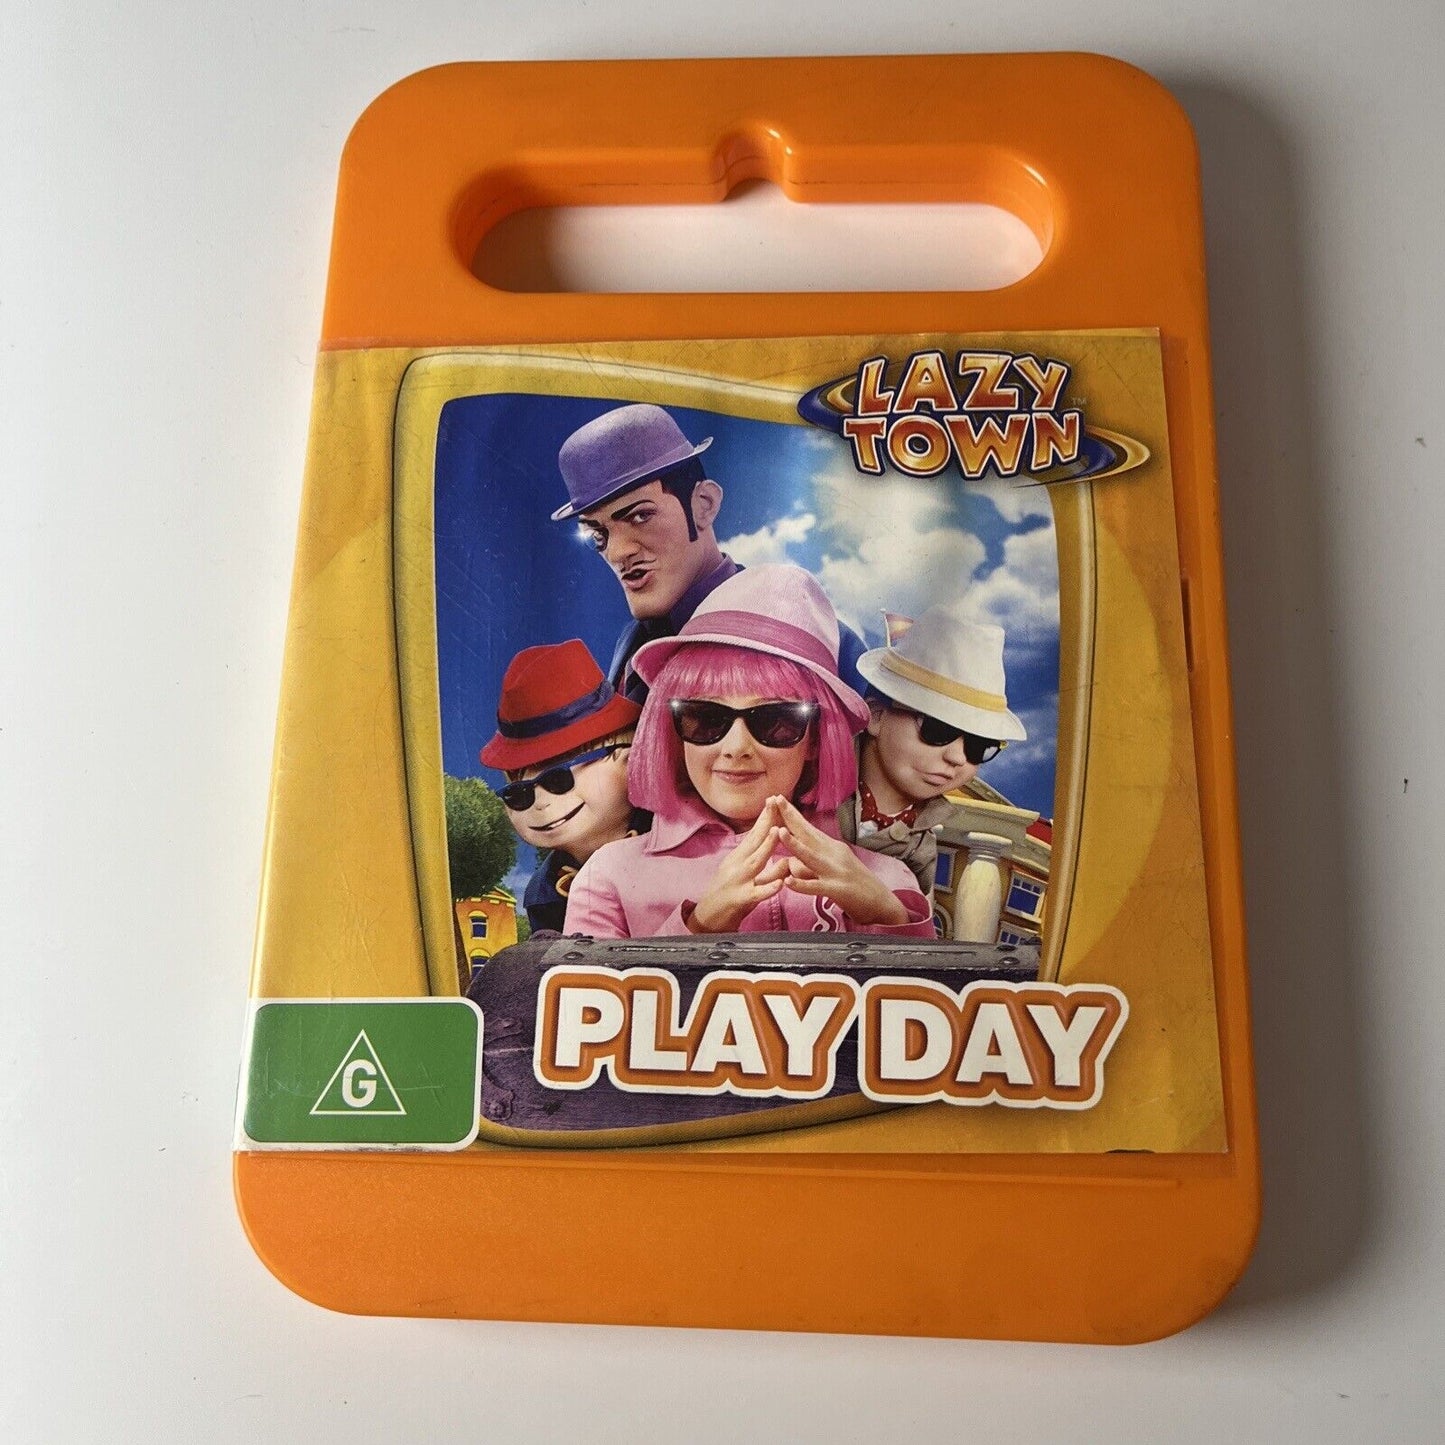 LazyTown - Play Day (DVD, 2009) ABC for Kids Region 4